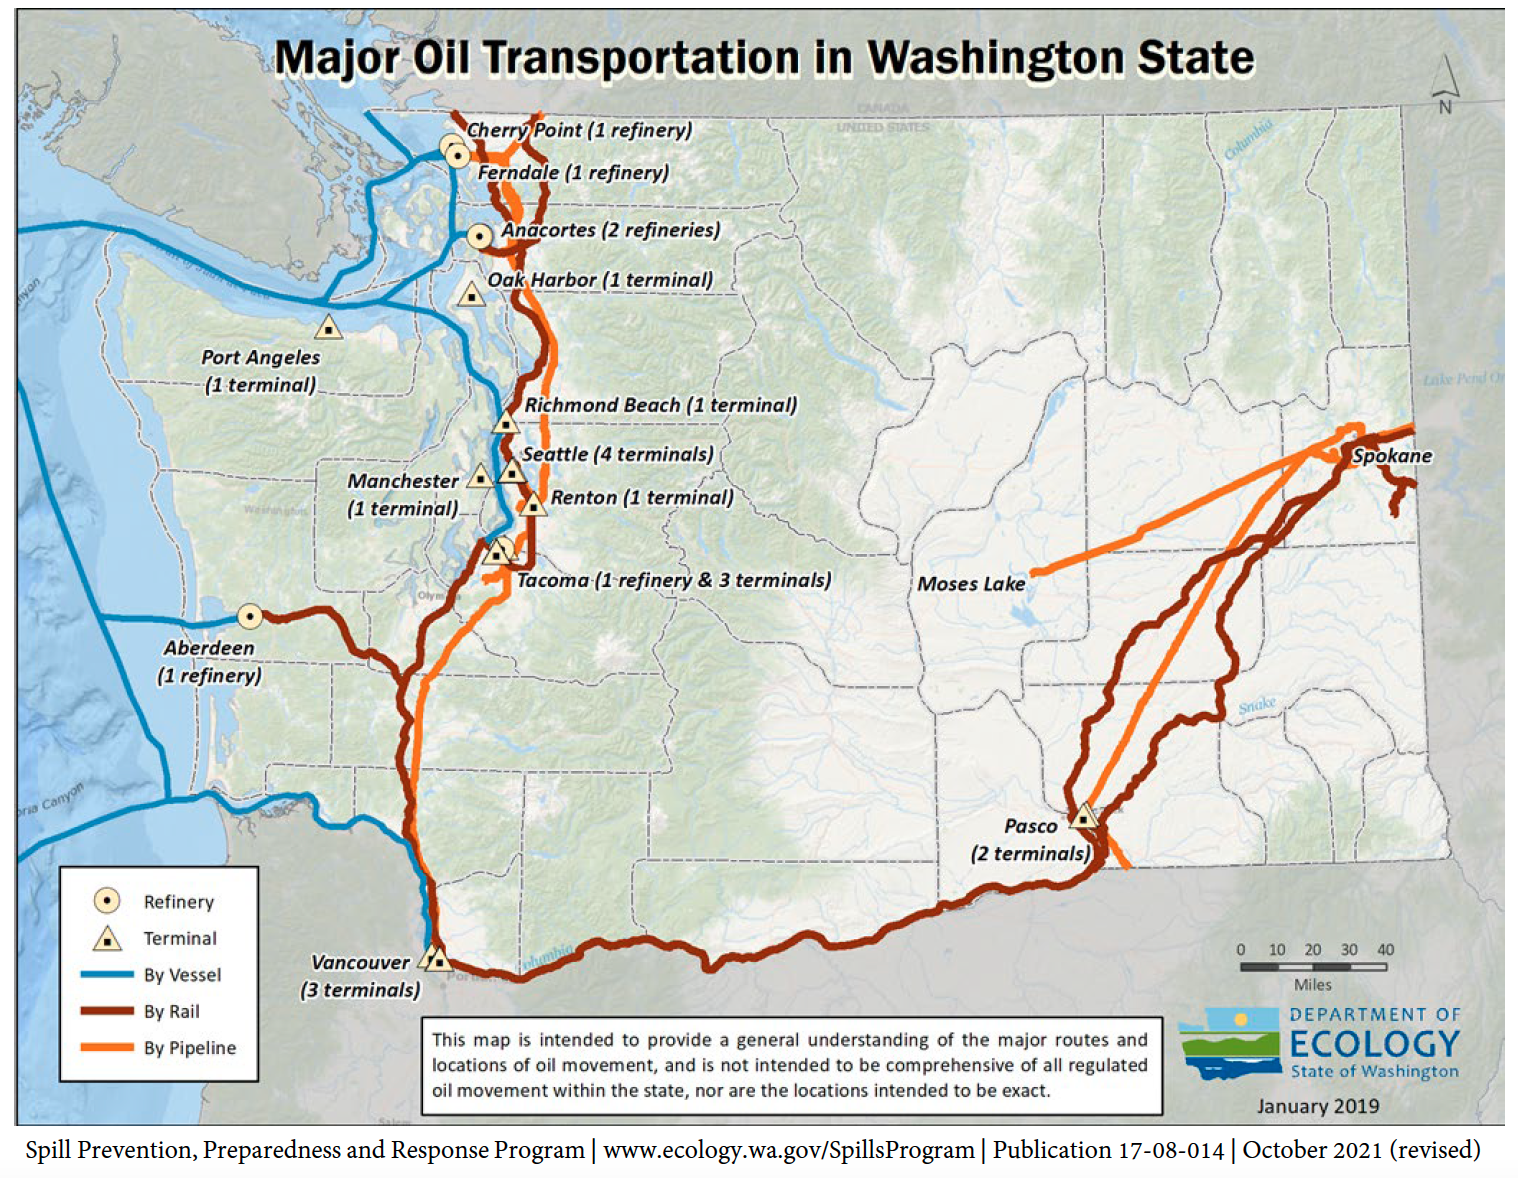 Oil Movement In & Out of Washington